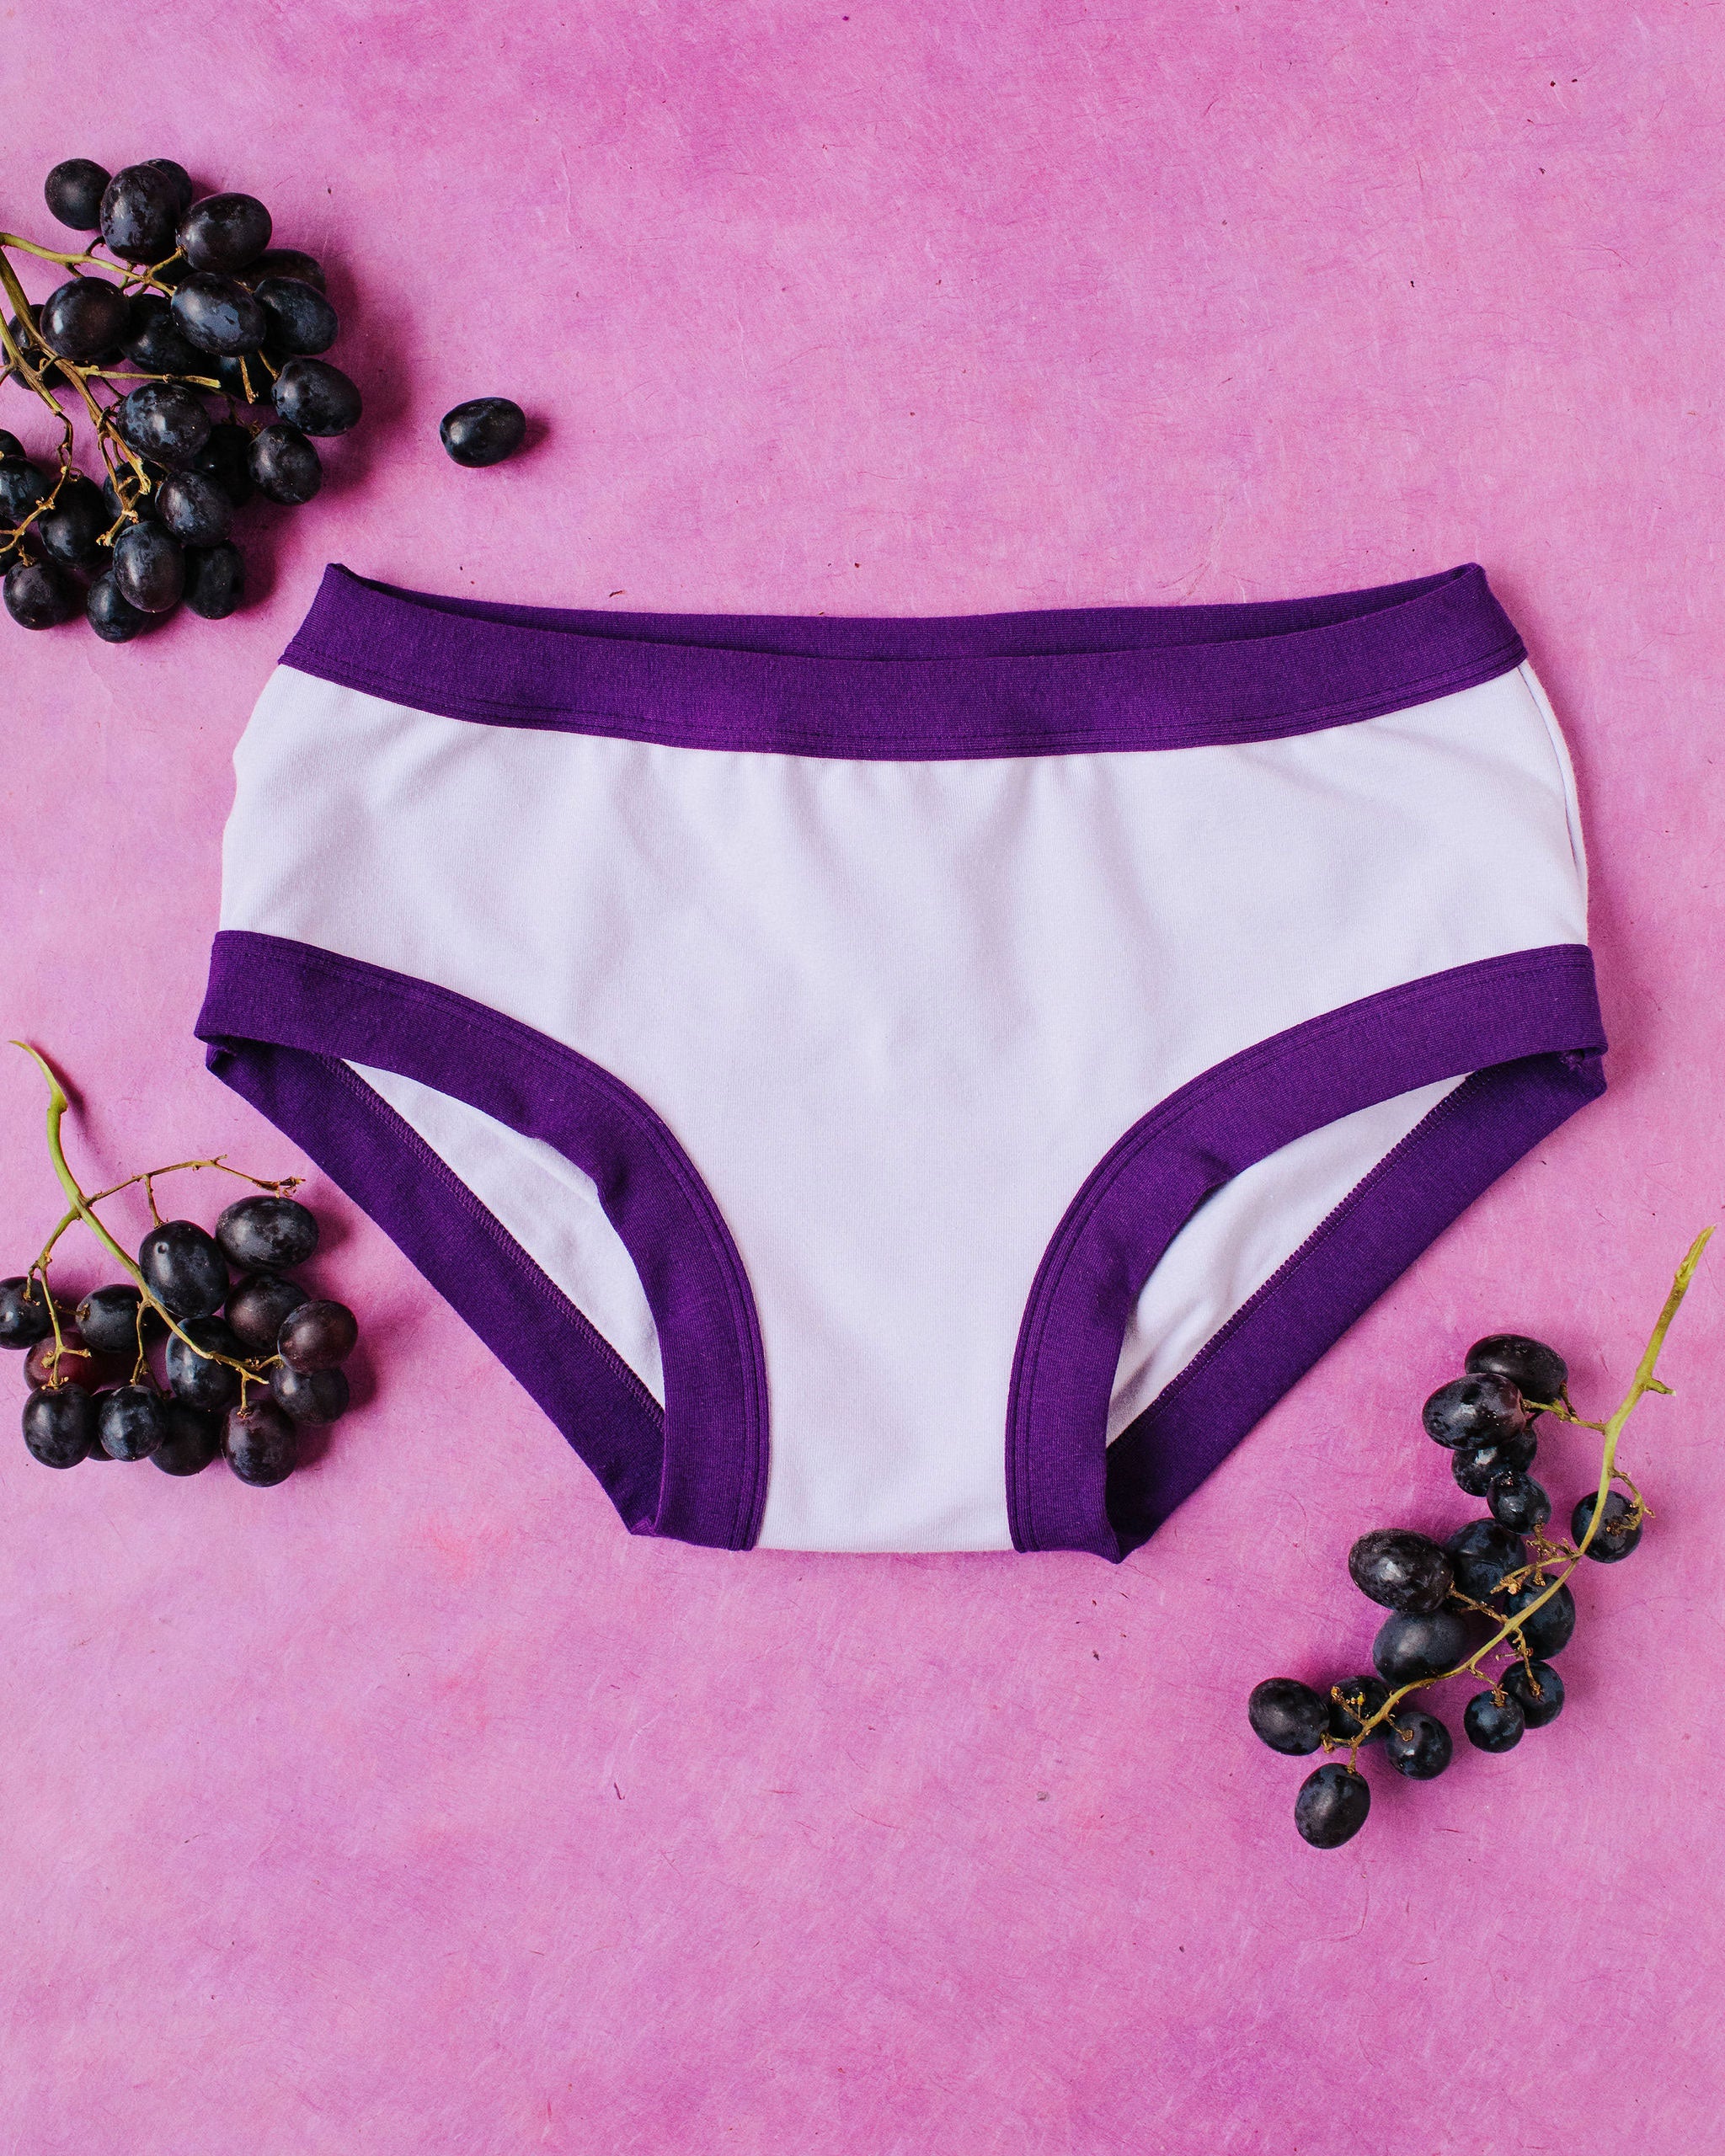 Flat lay with grapes on a purple surface of Grape Soda Hipsters style underwear: lavender color with dark purple binding.